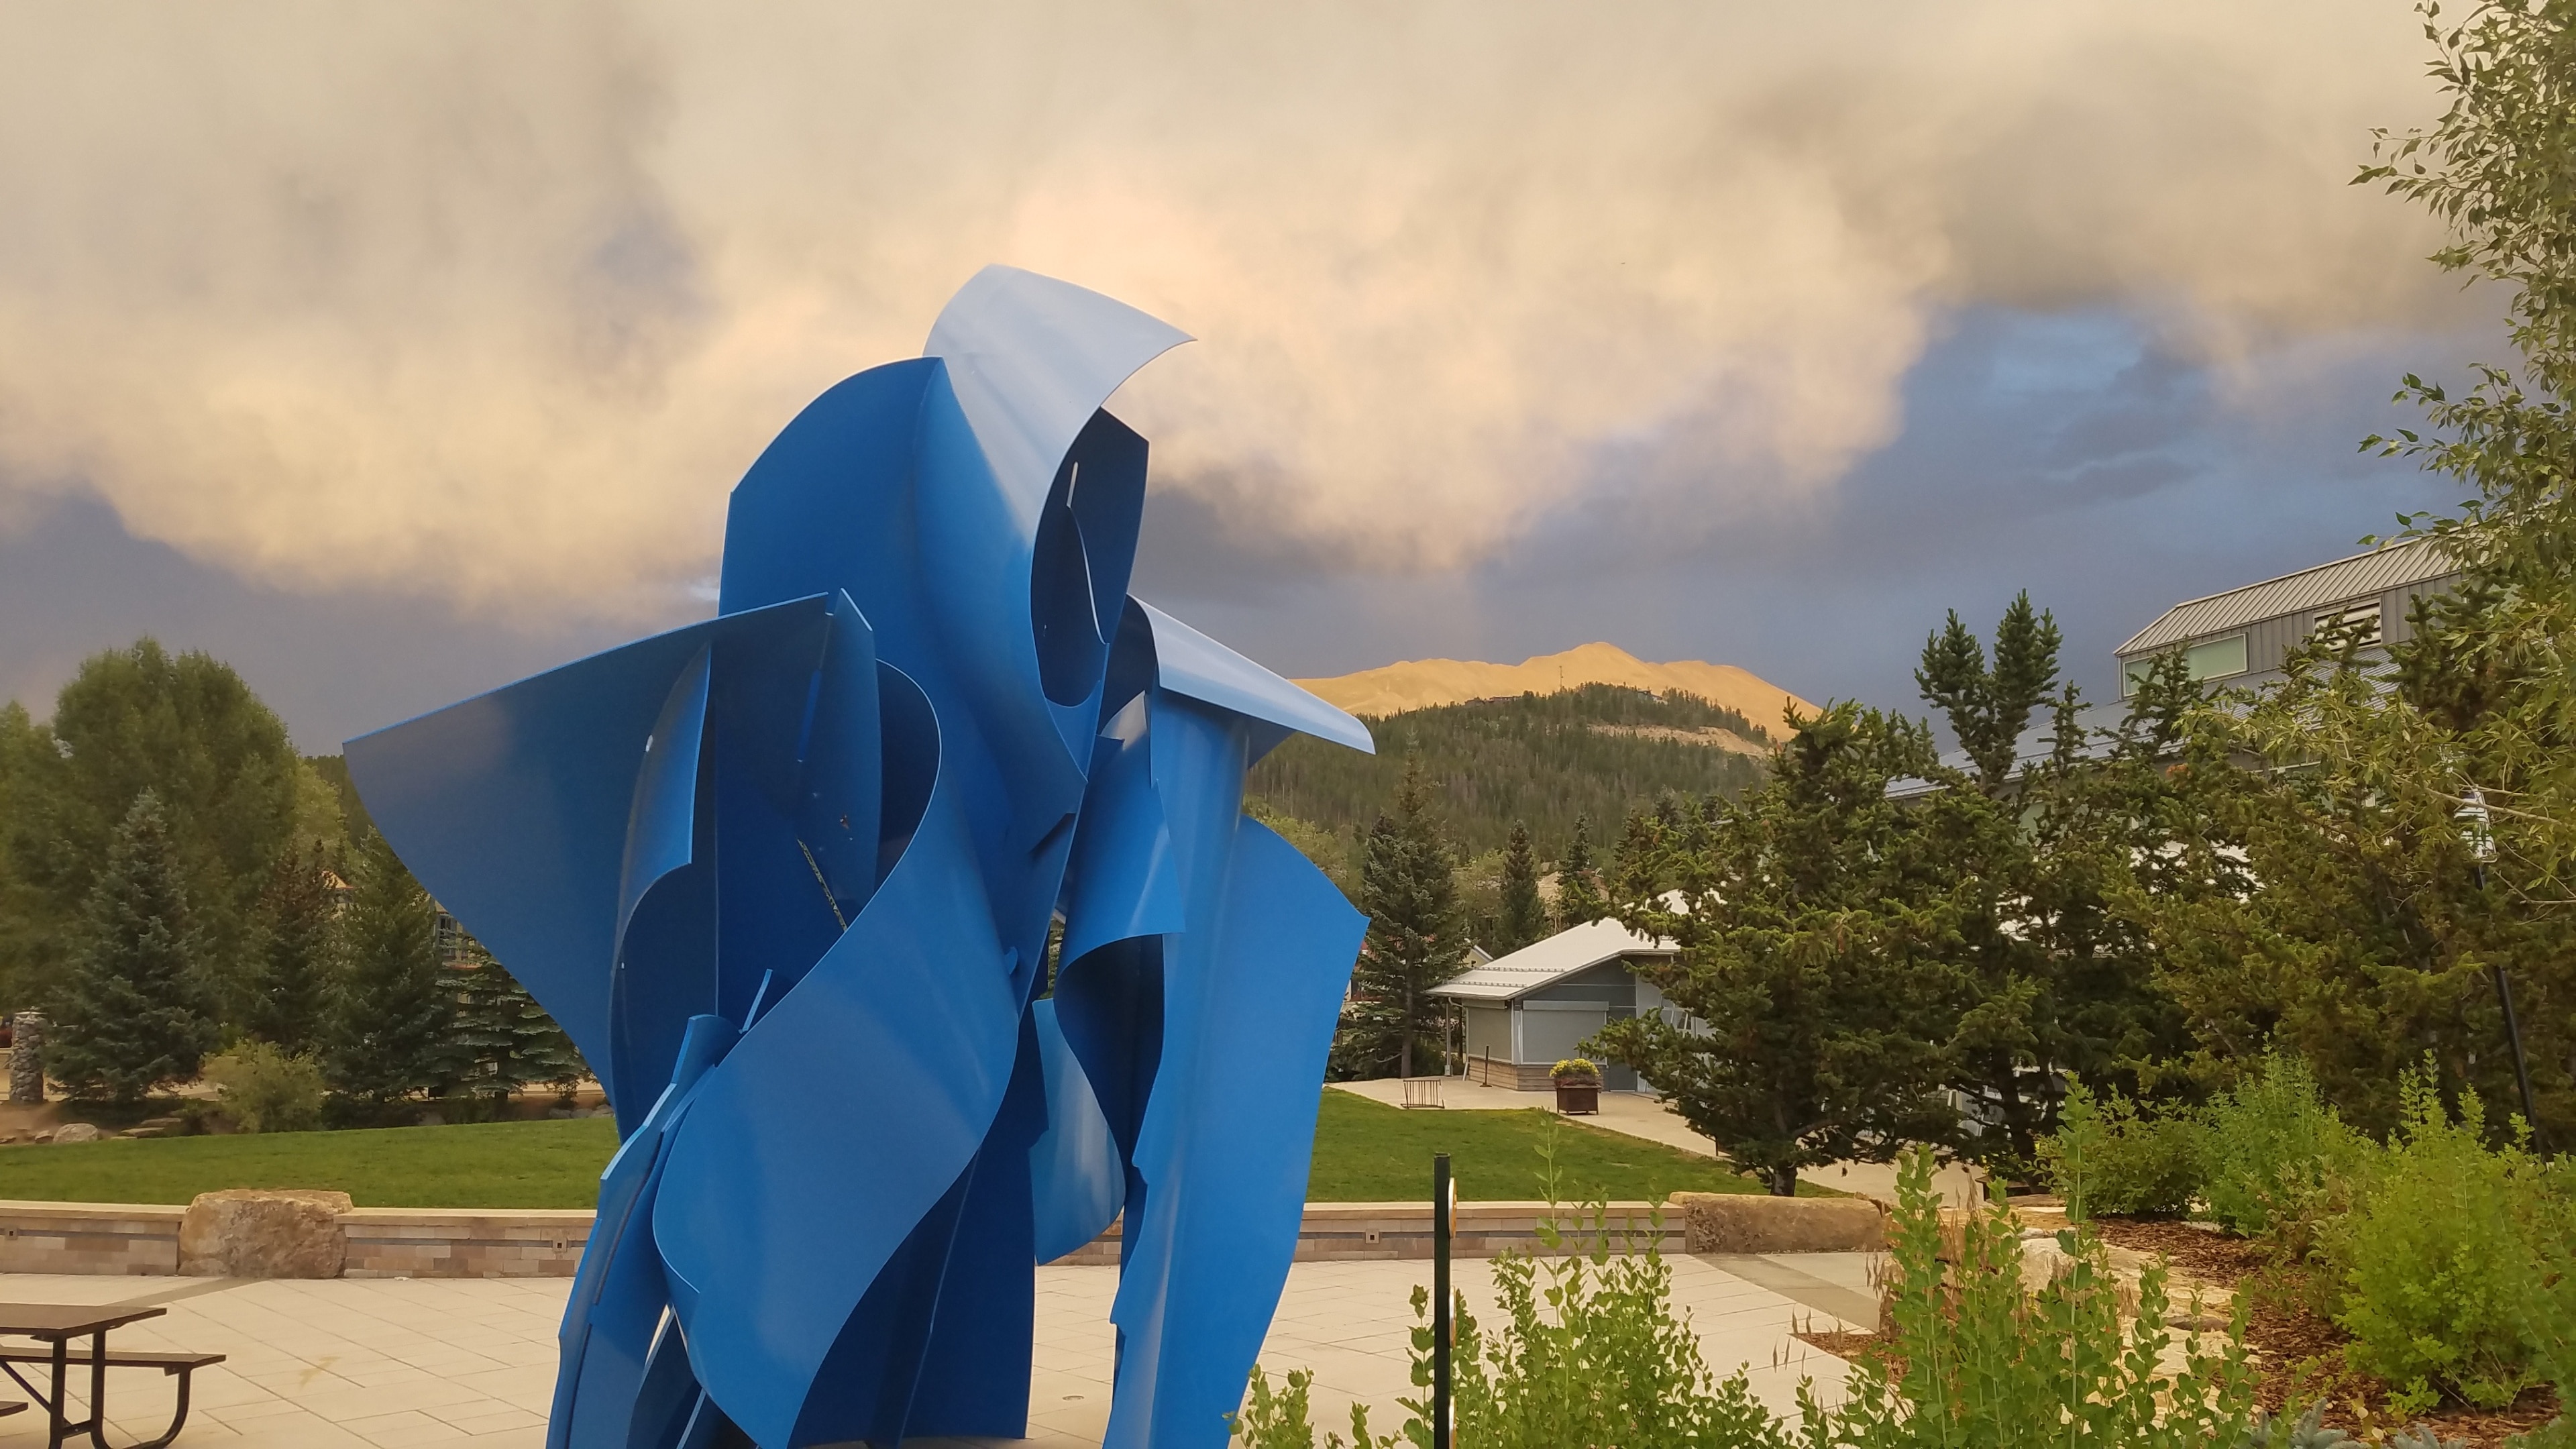 A sculpture in Breckinridge. Could not find a name or artist of this art work.